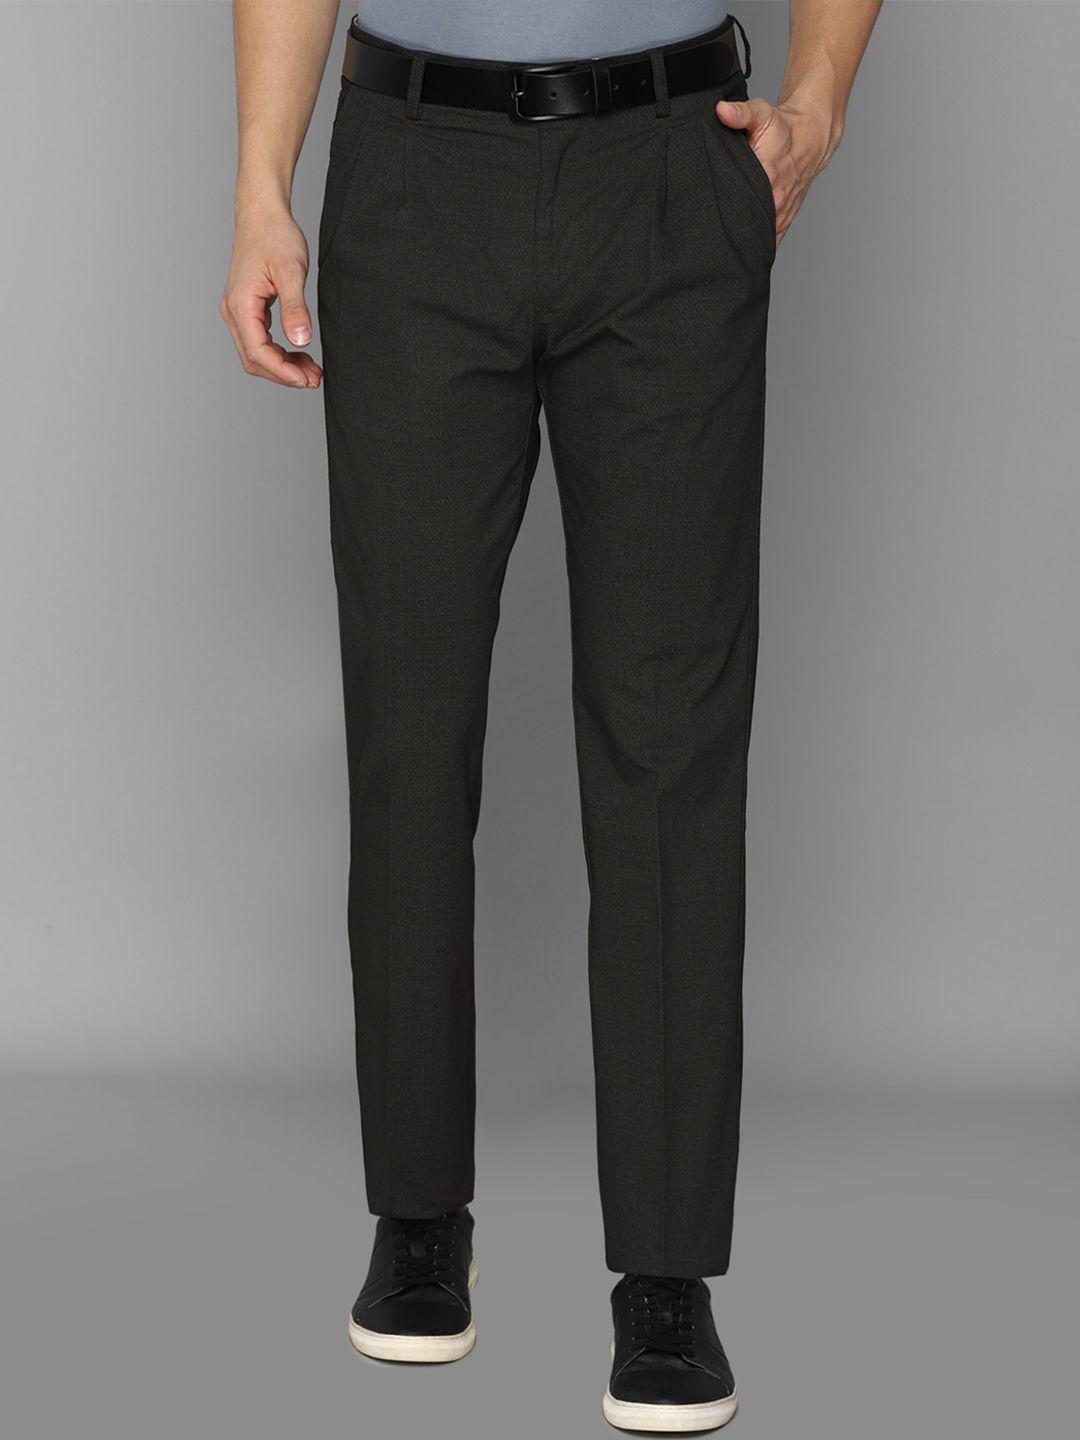 allen solly men black pleated solid trousers